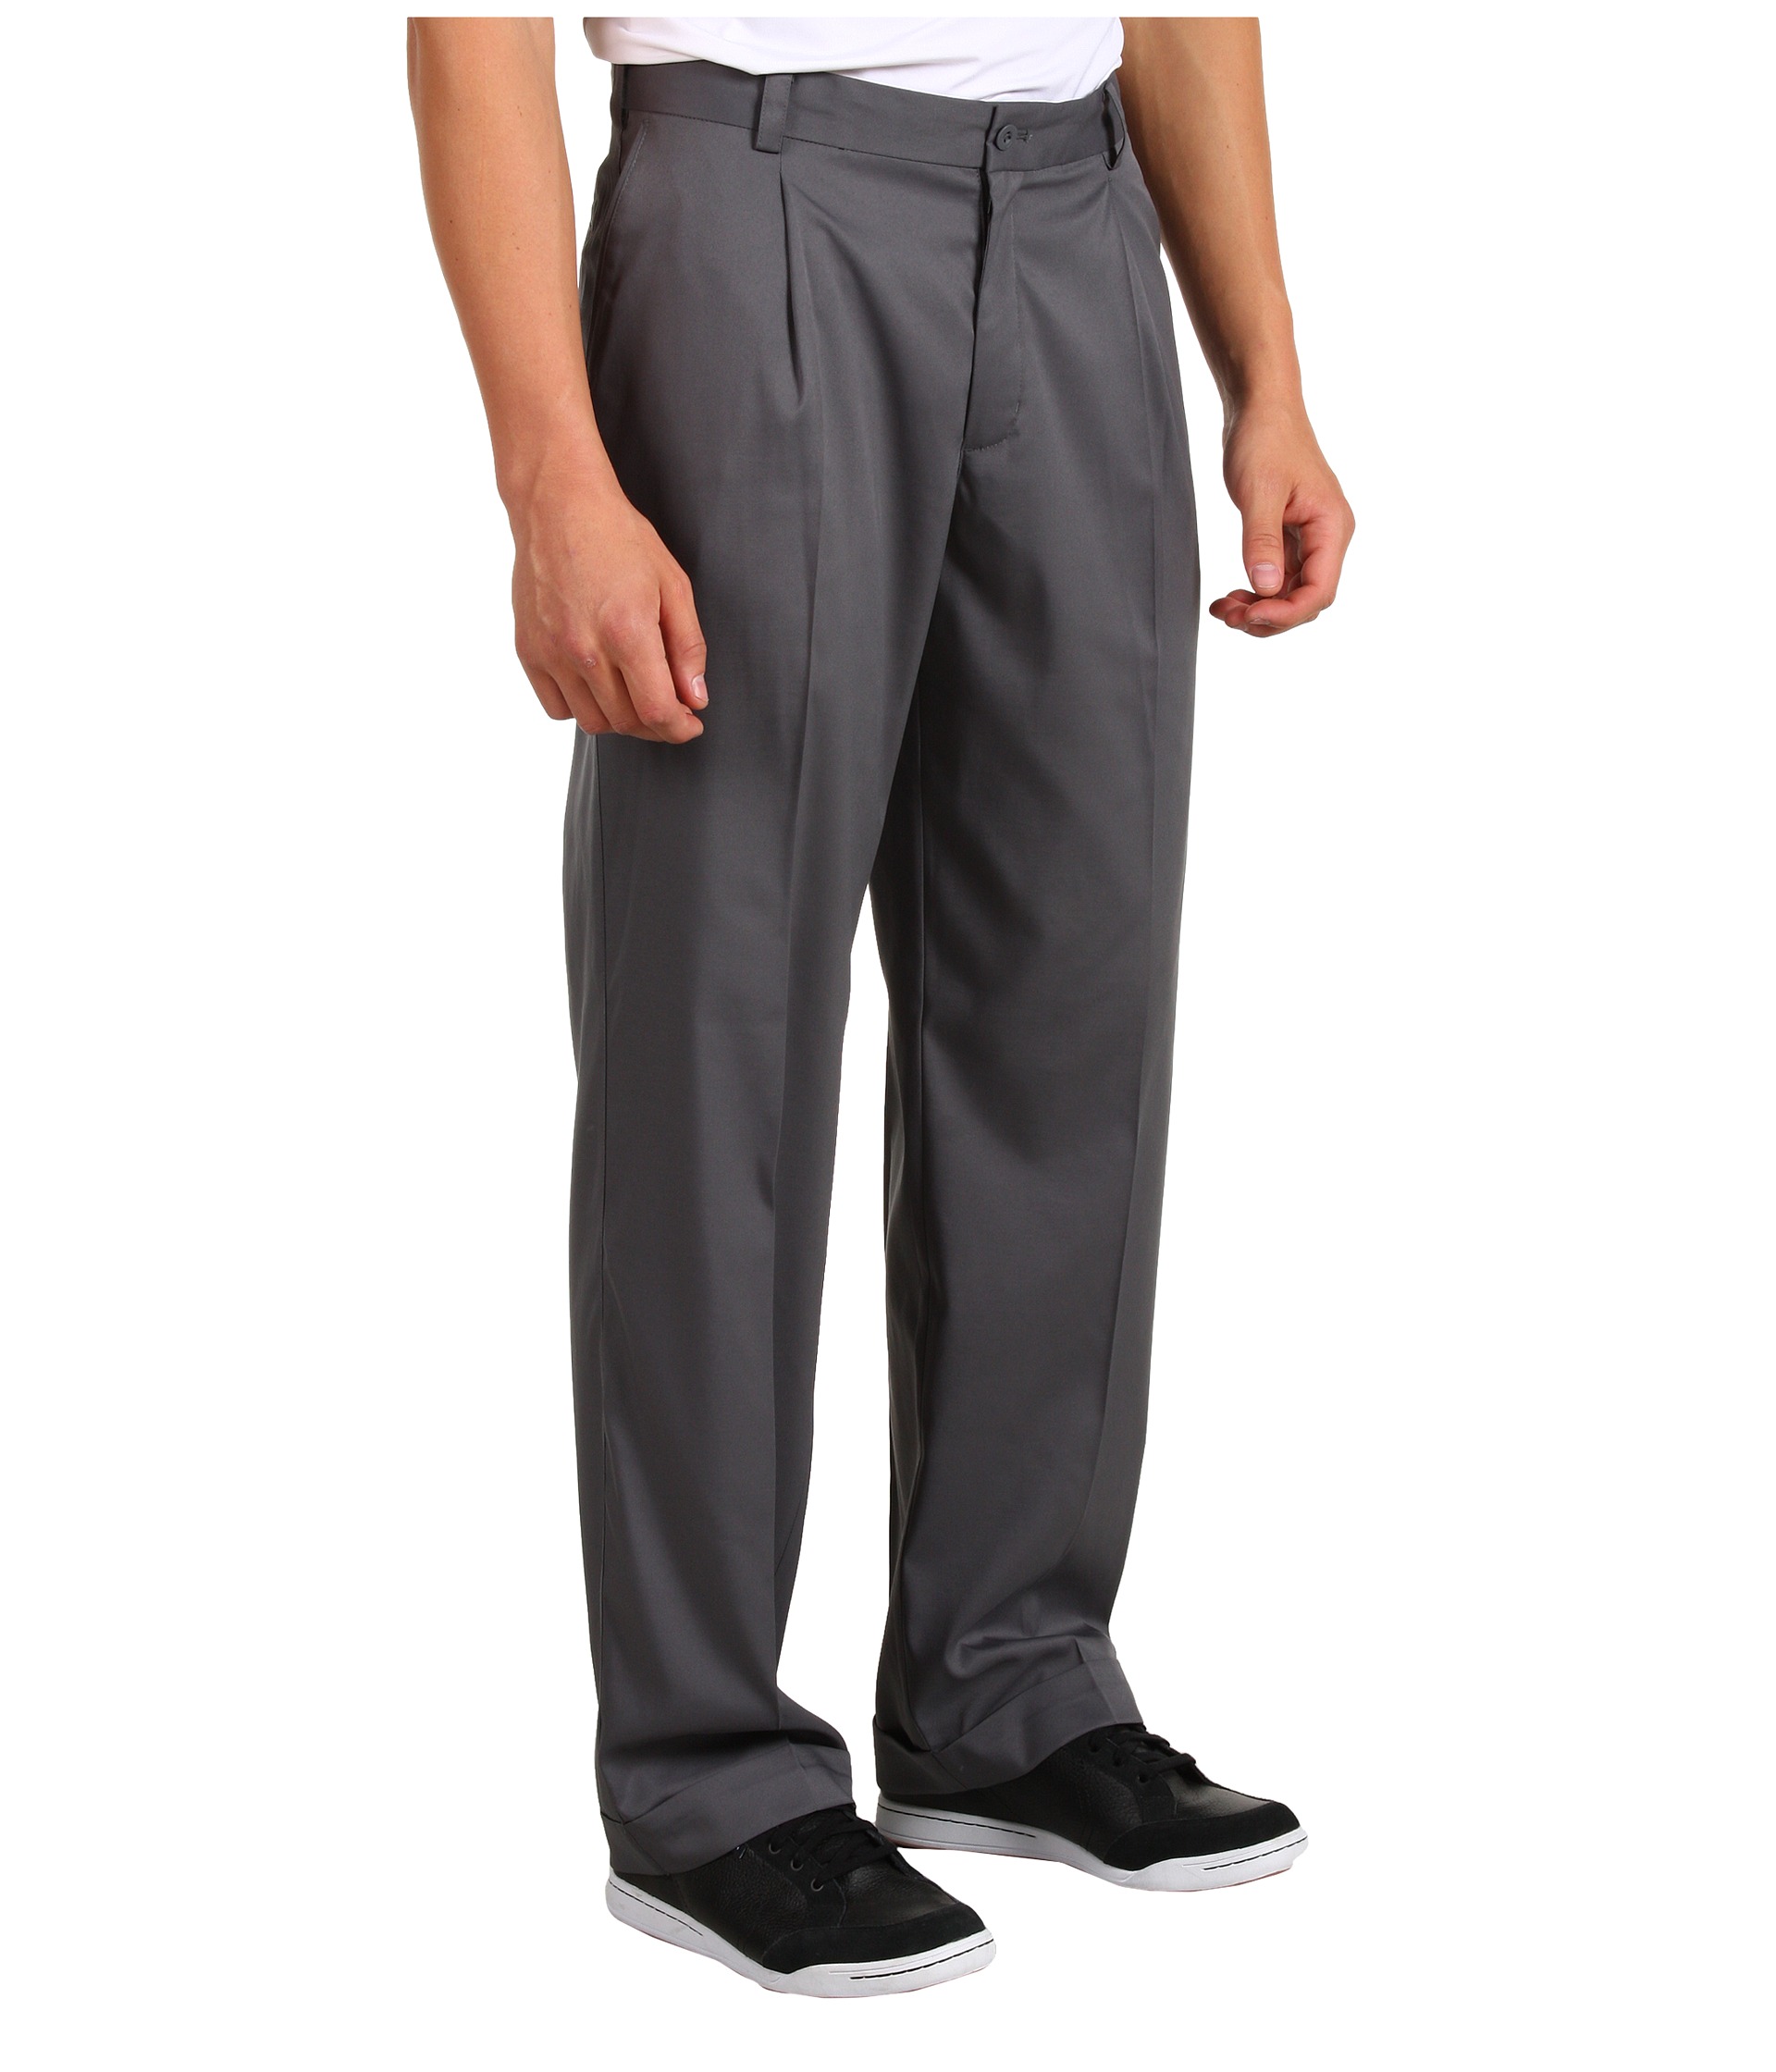 Nike Golf Tour Pleated Pant | Shipped Free at Zappos